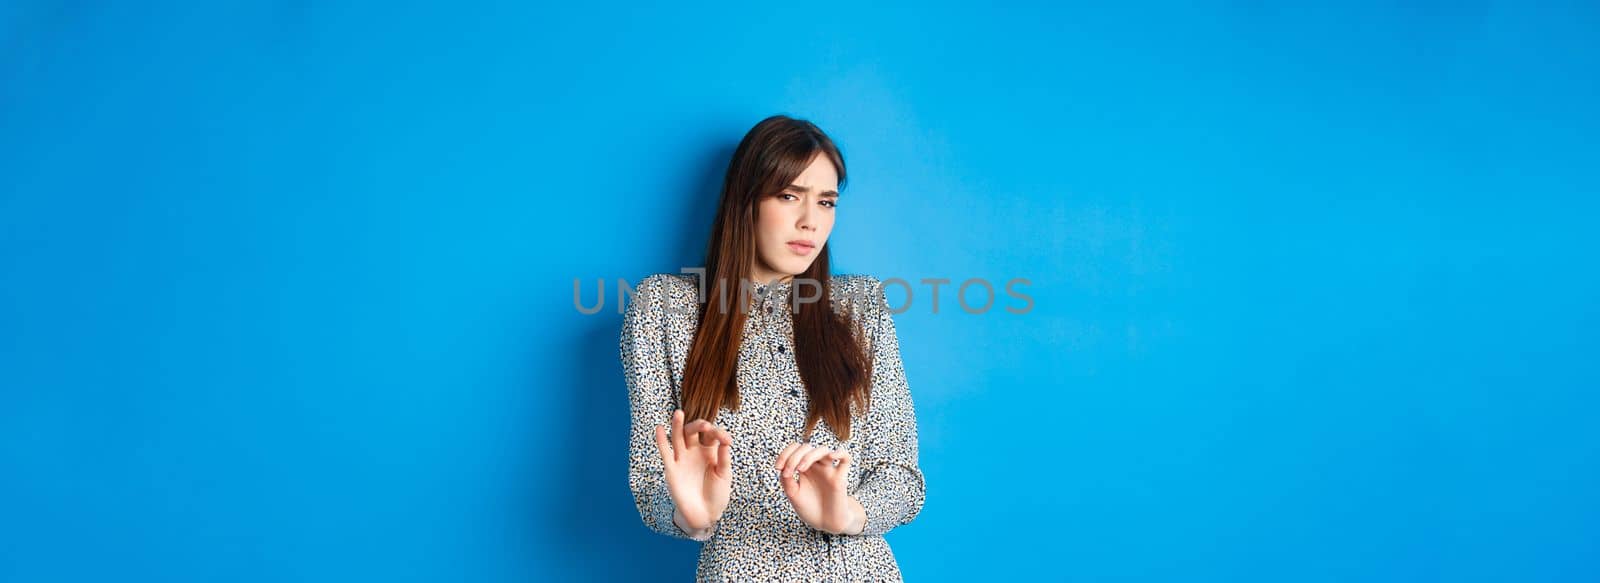 Disgusted and reluctant woman asking to keep away from here, showing block gesture, raising hands to stop you, standing on blue background.